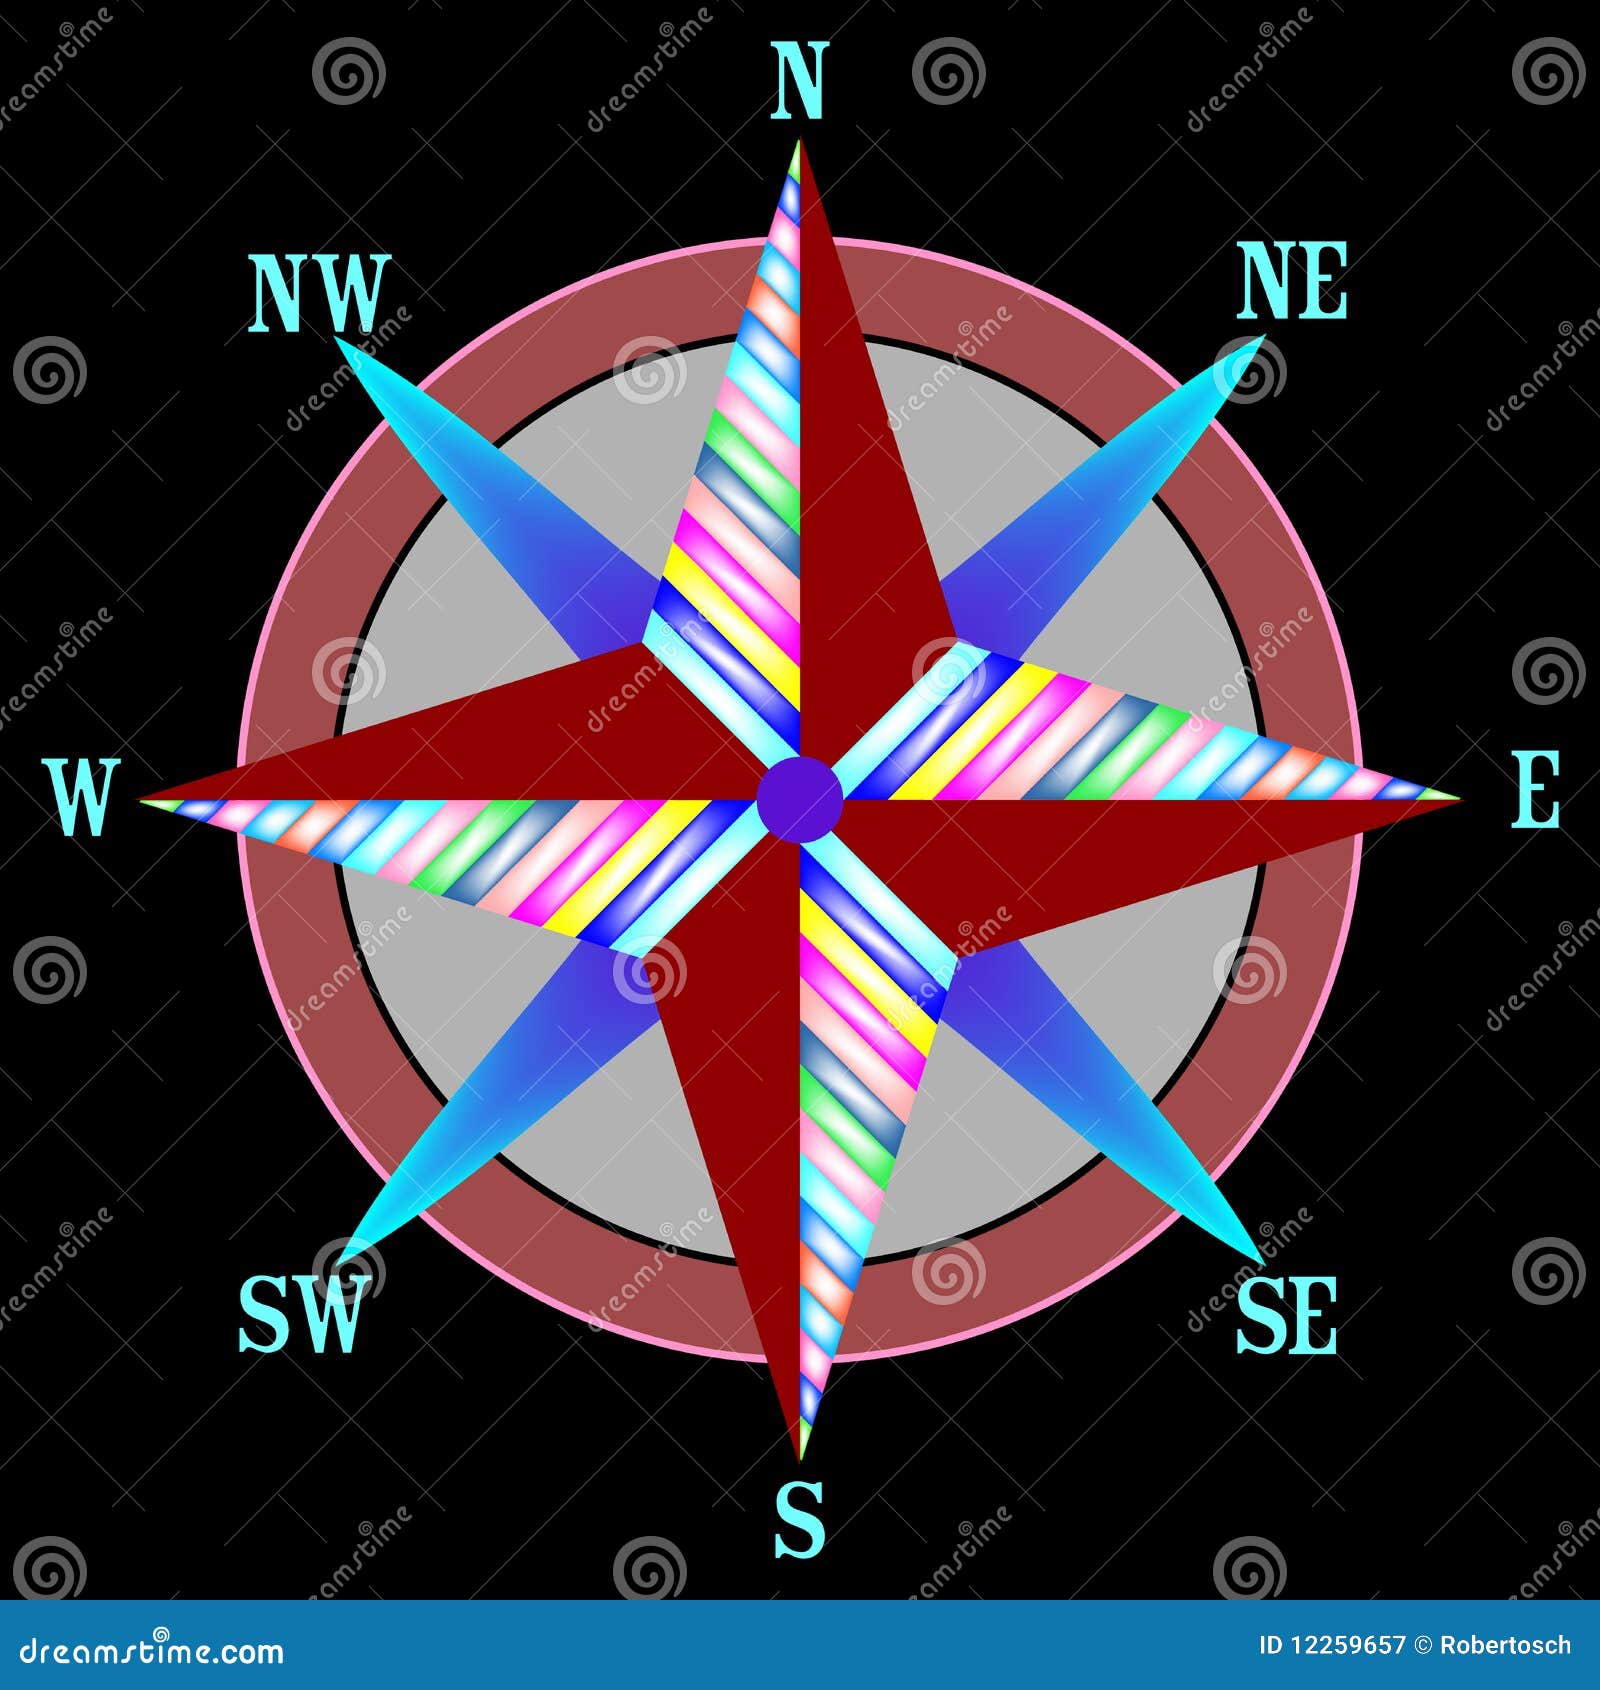 clipart wind rose - photo #32